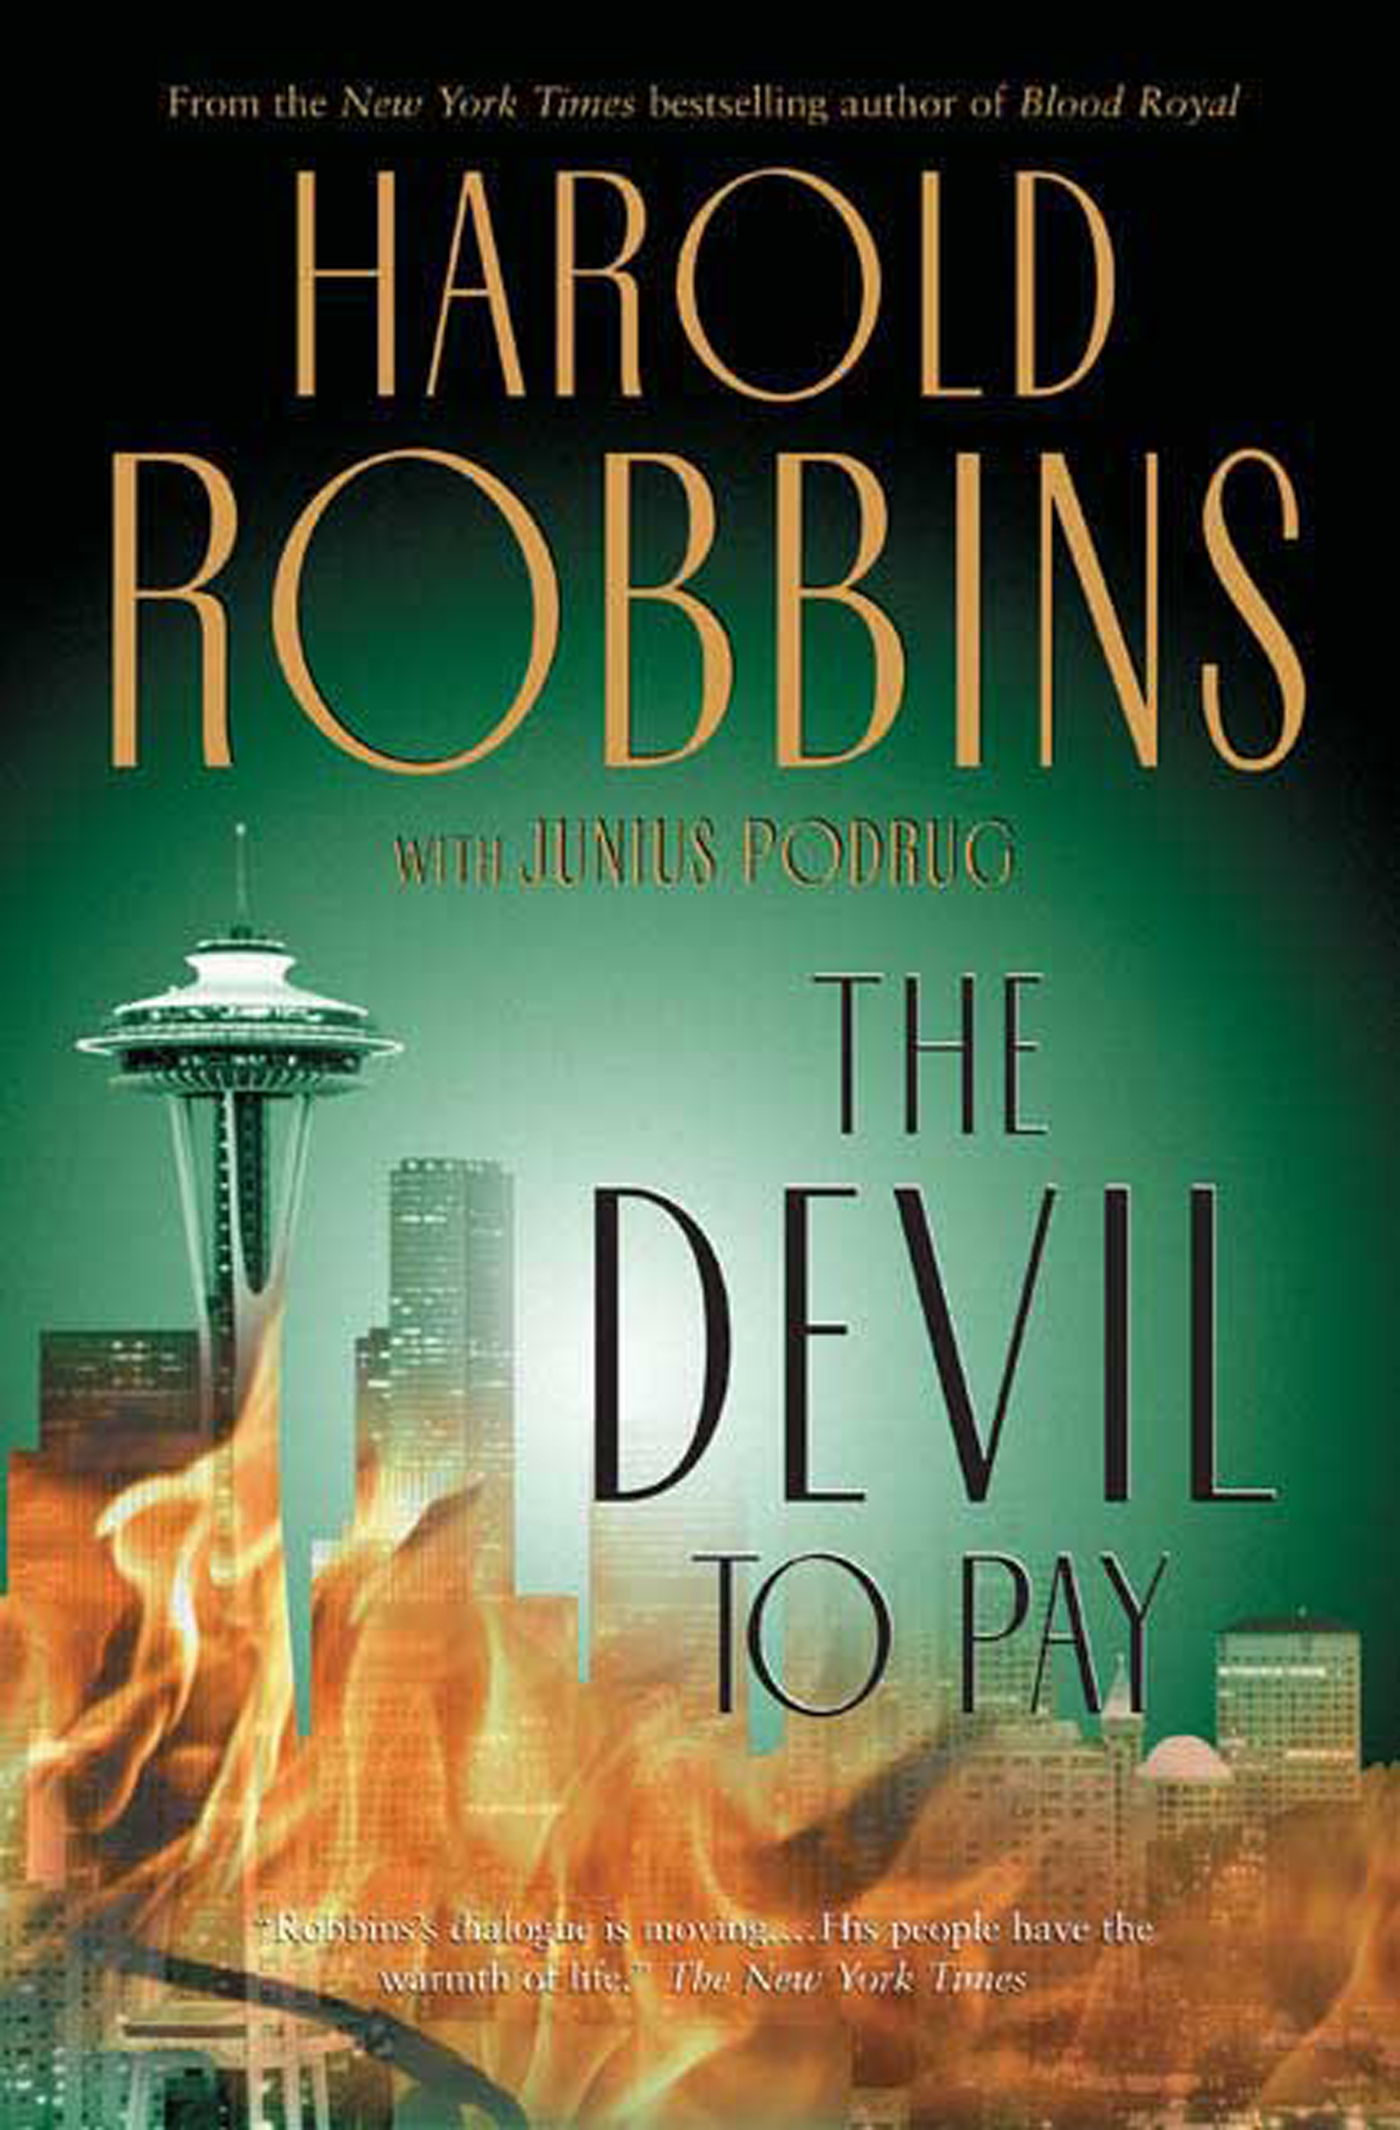 The Devil To Pay by Harold Robbins, Junius Podrug